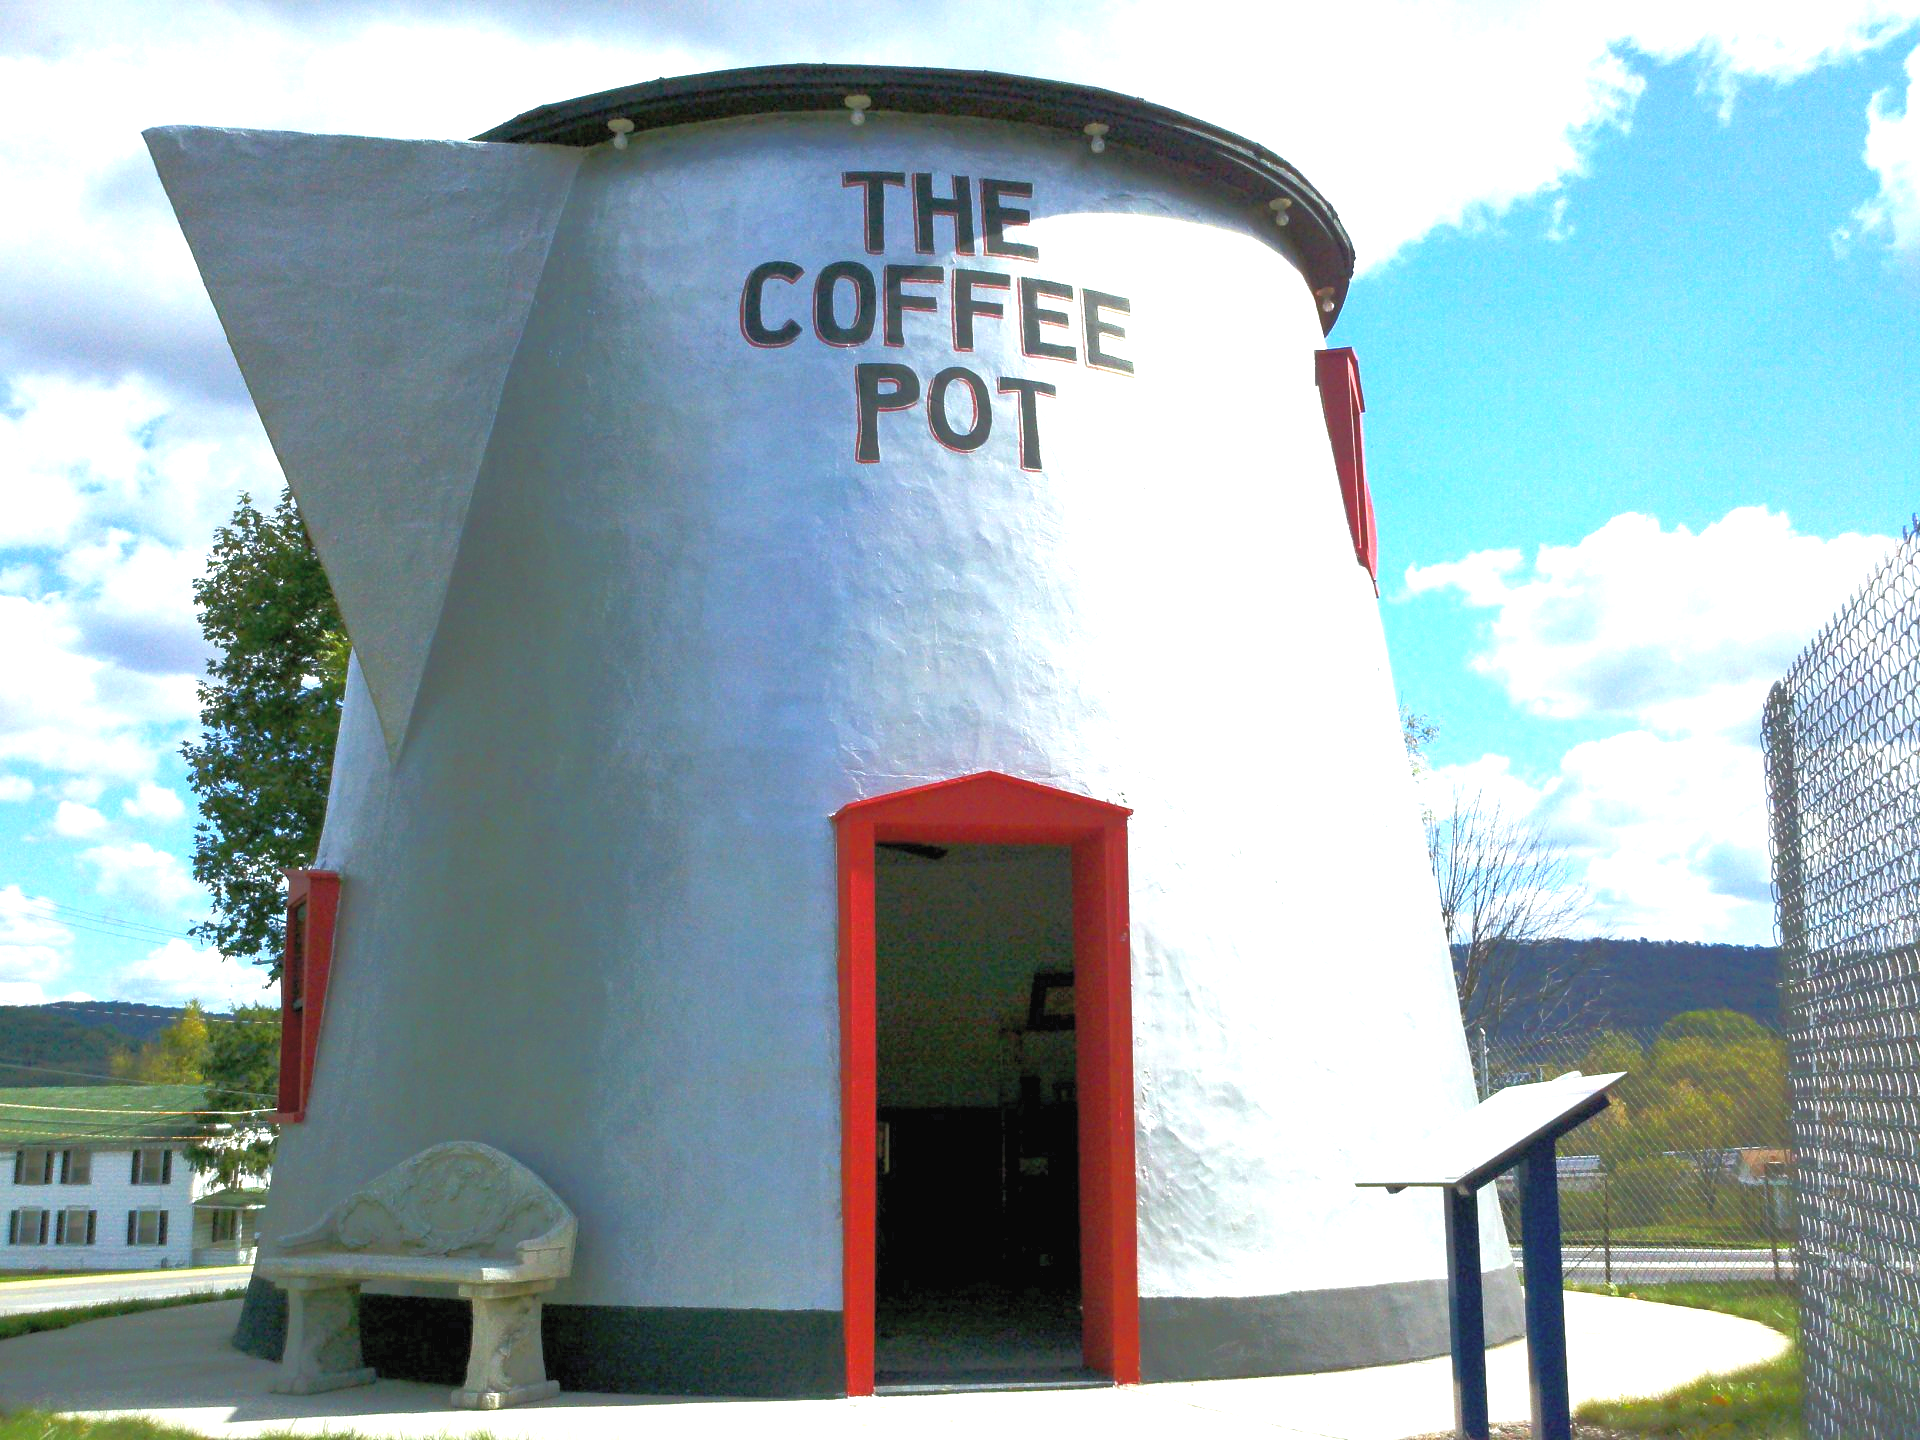 Largest Coffee Pot: The Koontz Coffee Pot in Bedford sets world record